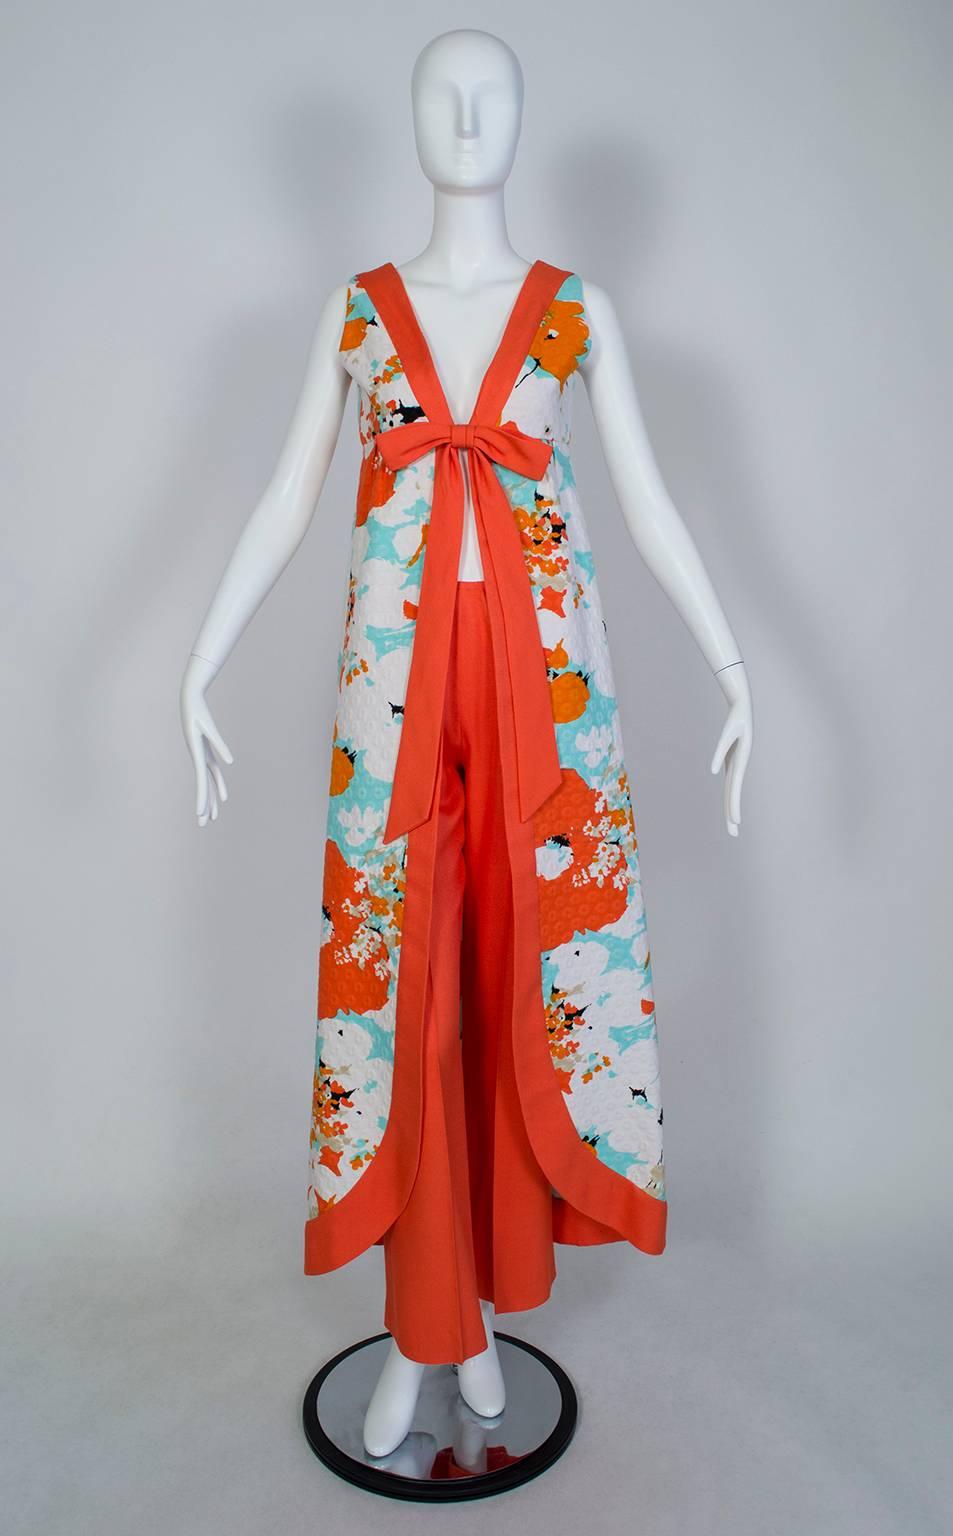 Singular and stunning, this unforgettable 2-piece ensemble is the embodiment of the jet set zeitgeist prevalent in the 1960s and early 70s. Consisting of a split-back maxi dress and coordinating cigarette pants, the outfit can be worn open either in